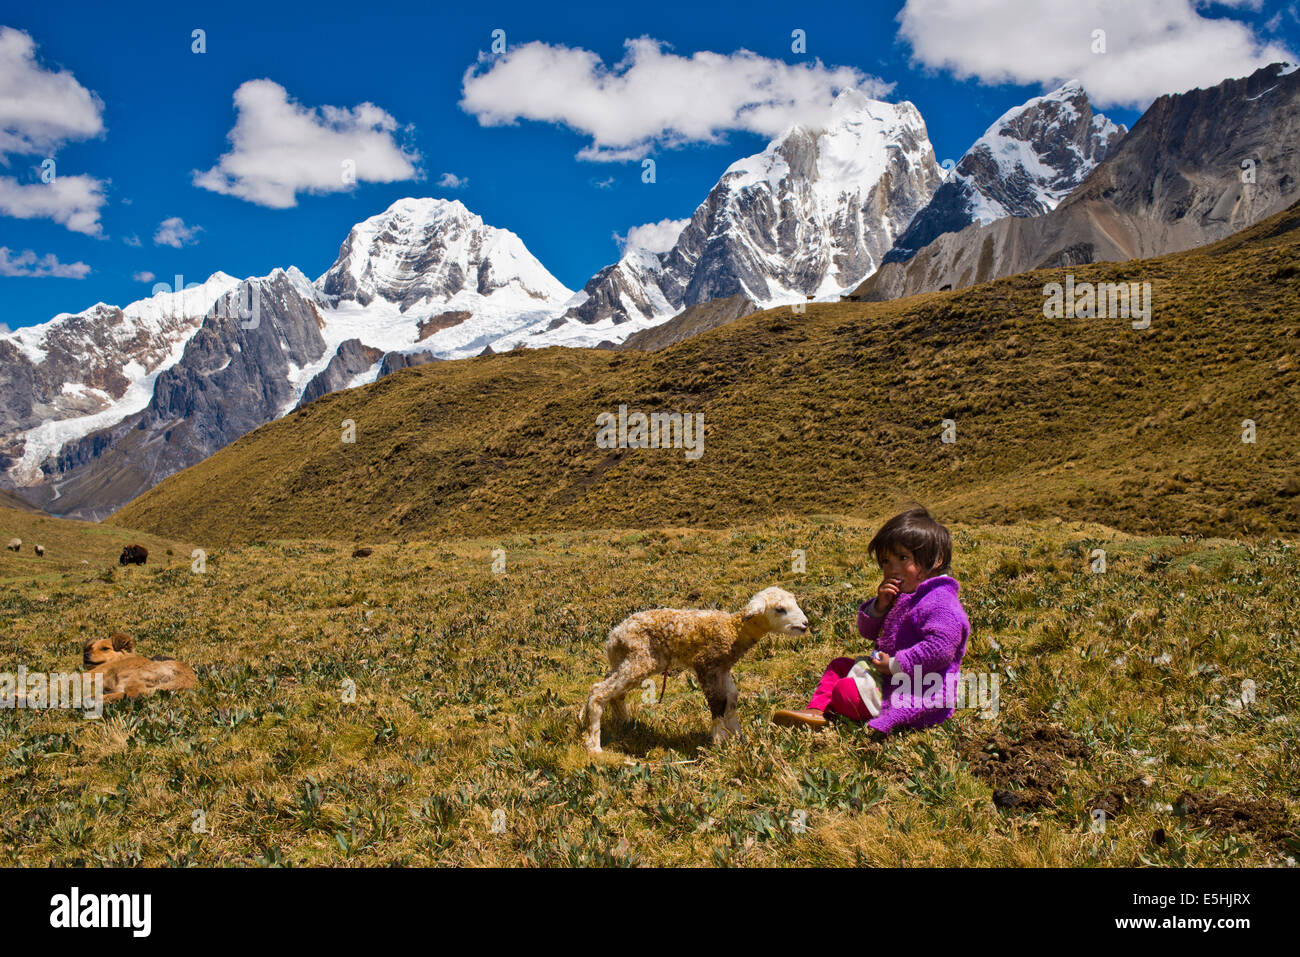 A girl of the Quechua Indians sitting with a newborn lamb on a mountain meadow in front of snow-capped mountains Stock Photo